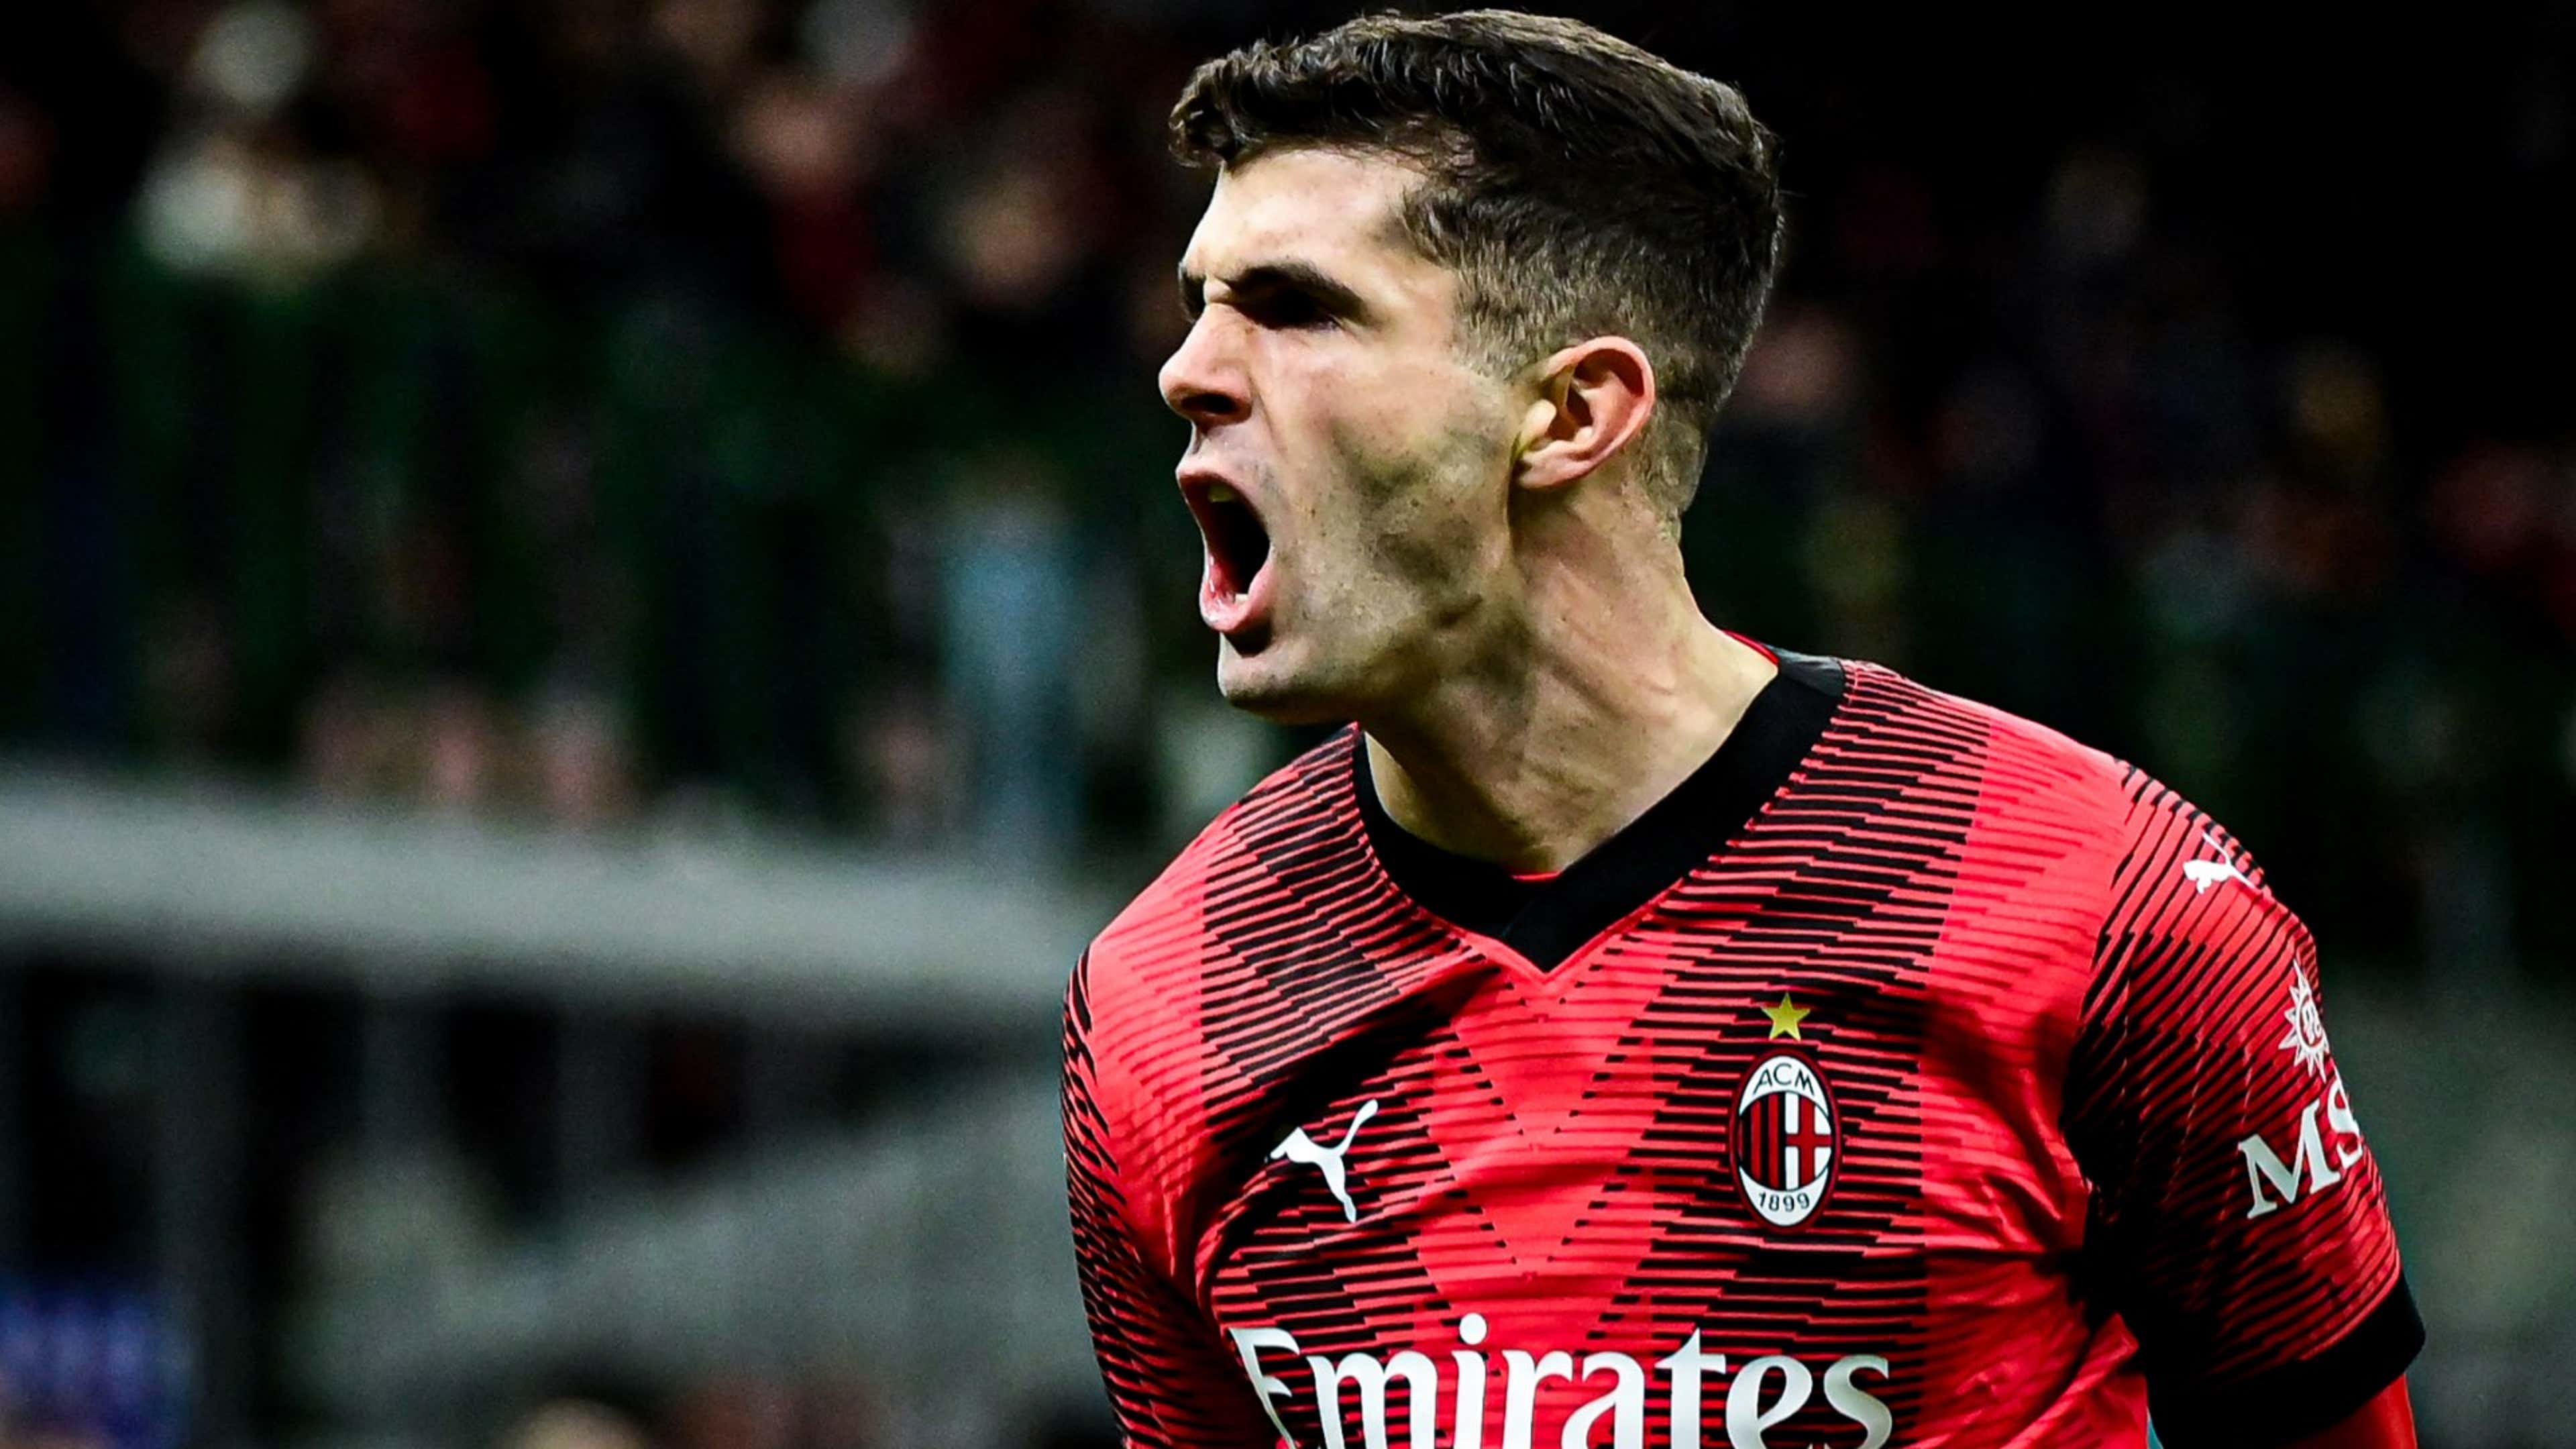 Christian Pulisic has found his true home! In-form AC Milan star can help  USMNT challenge Lionel Messi & Argentina for Copa America glory after  superb start to life at San Siro